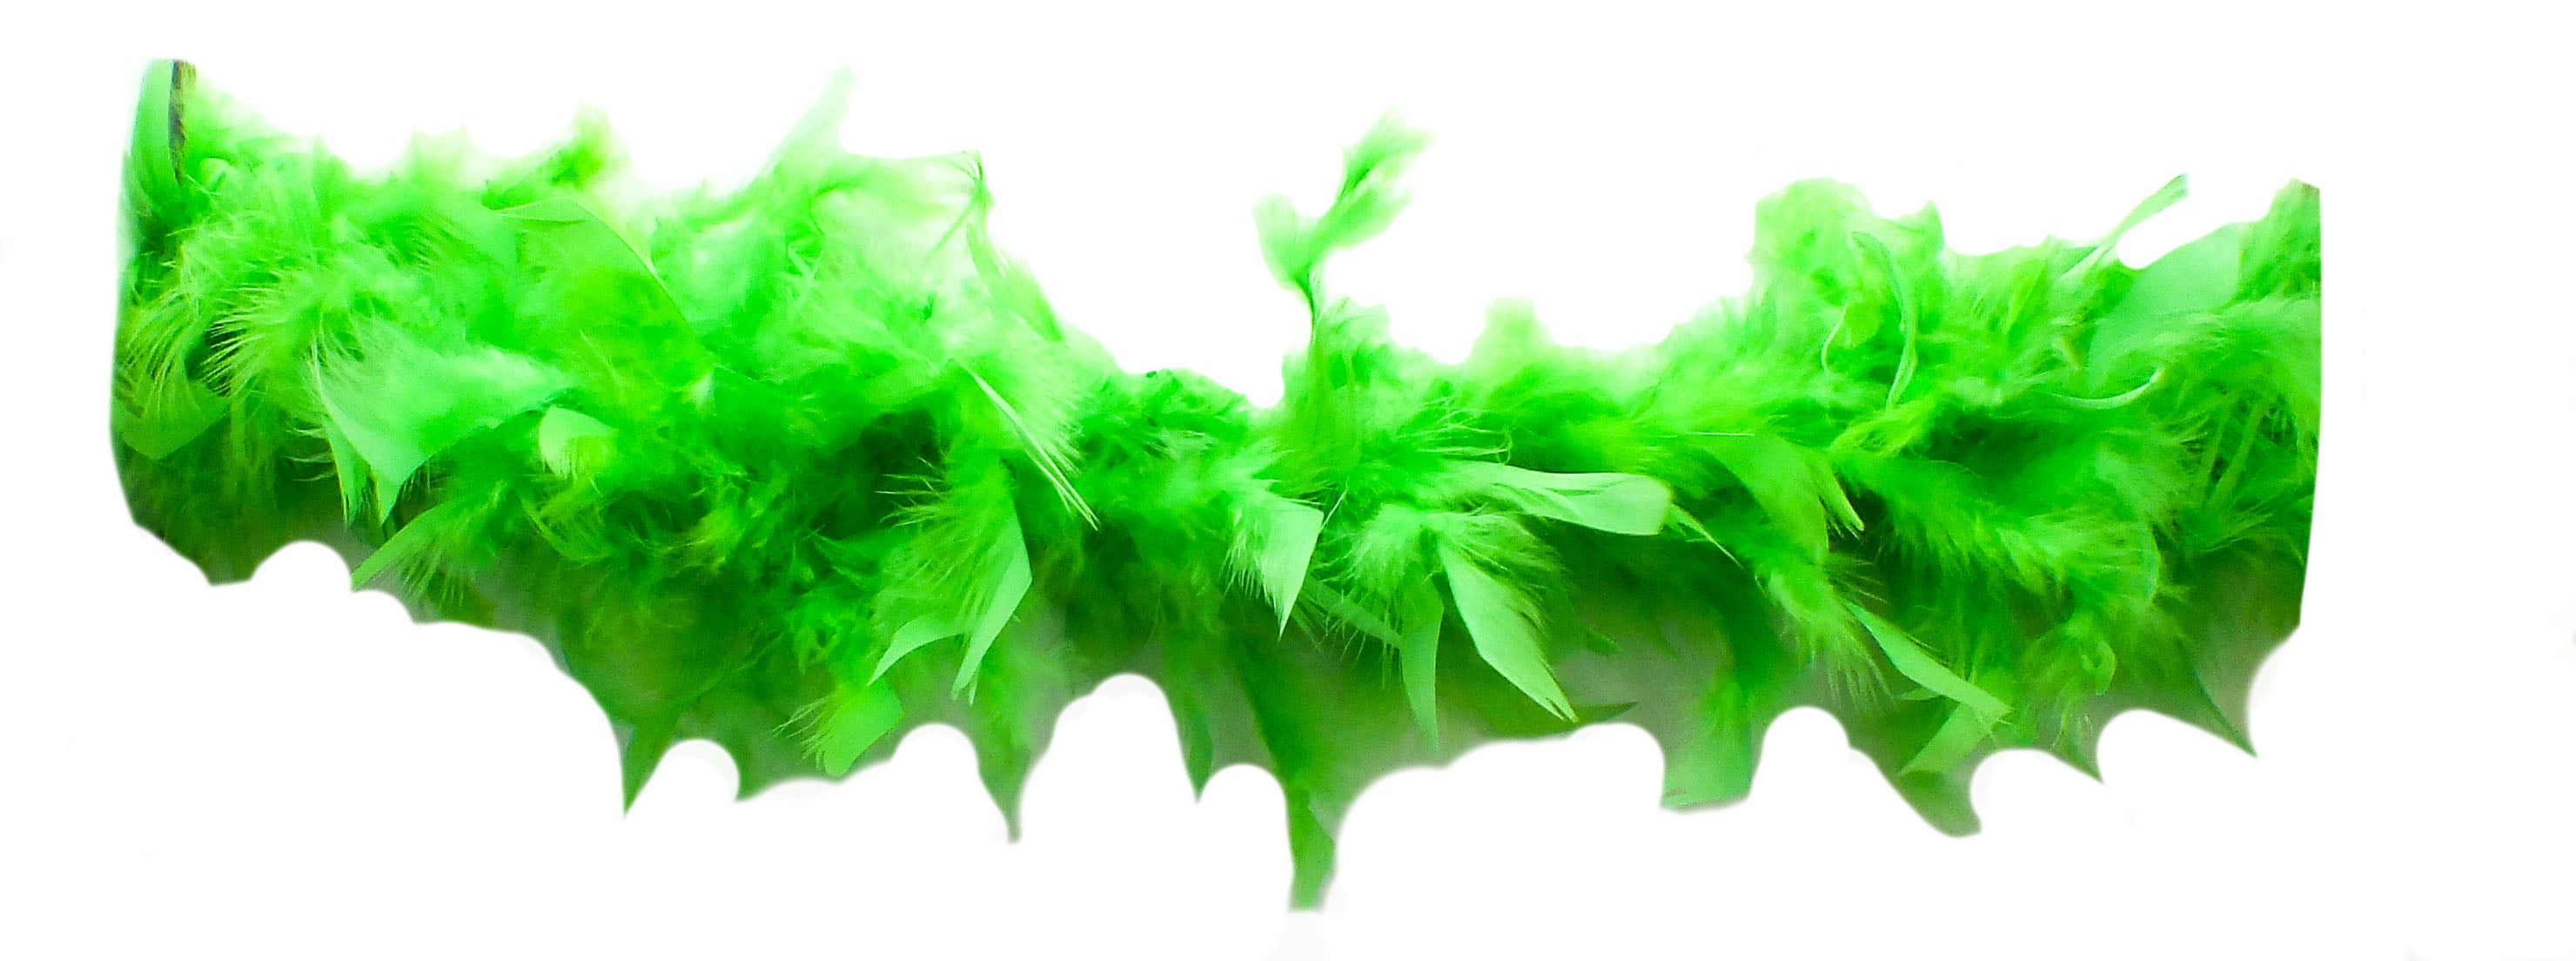 Green Feather Boa 72in